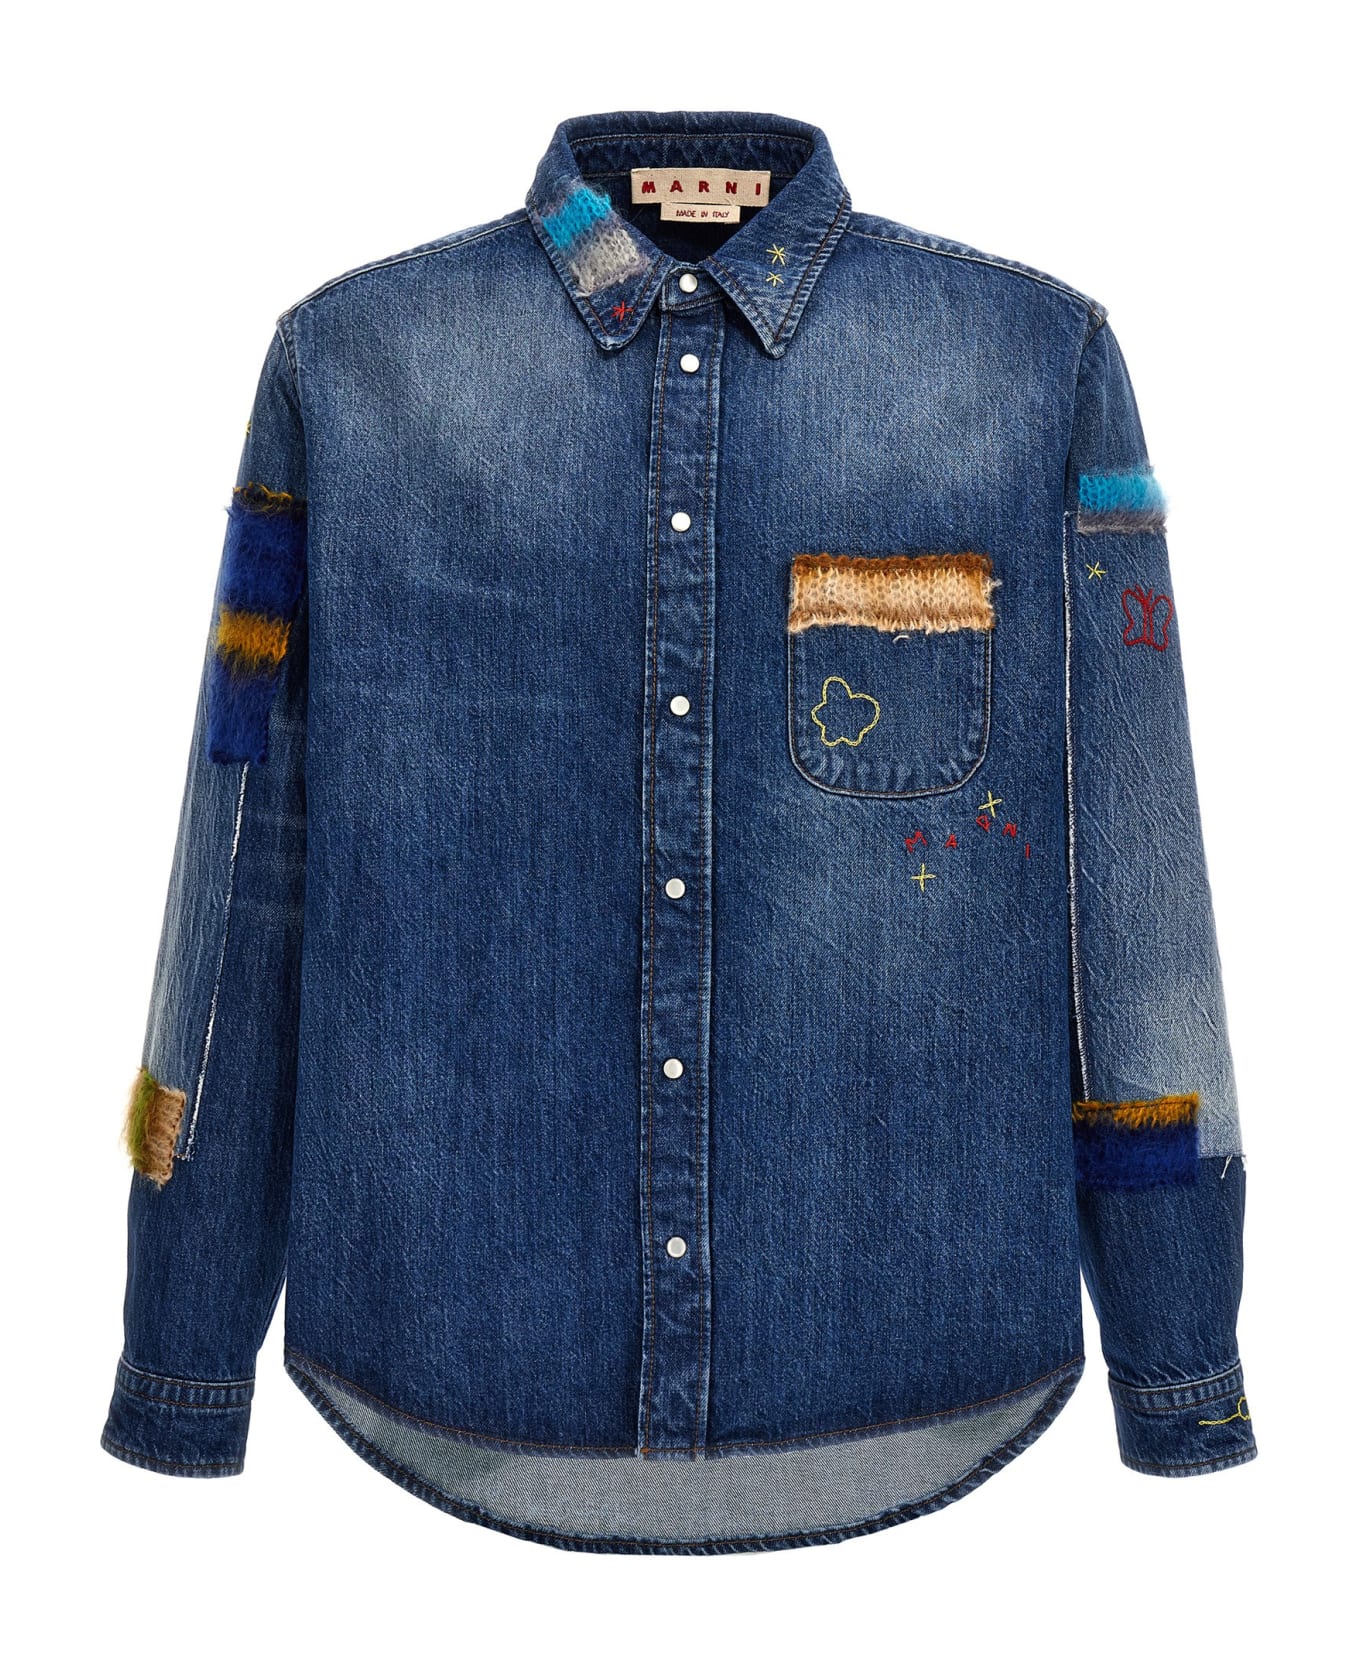 Marni choker Denim Shirt, Embroidery And Patches - BLUE/MULTICOLOUR